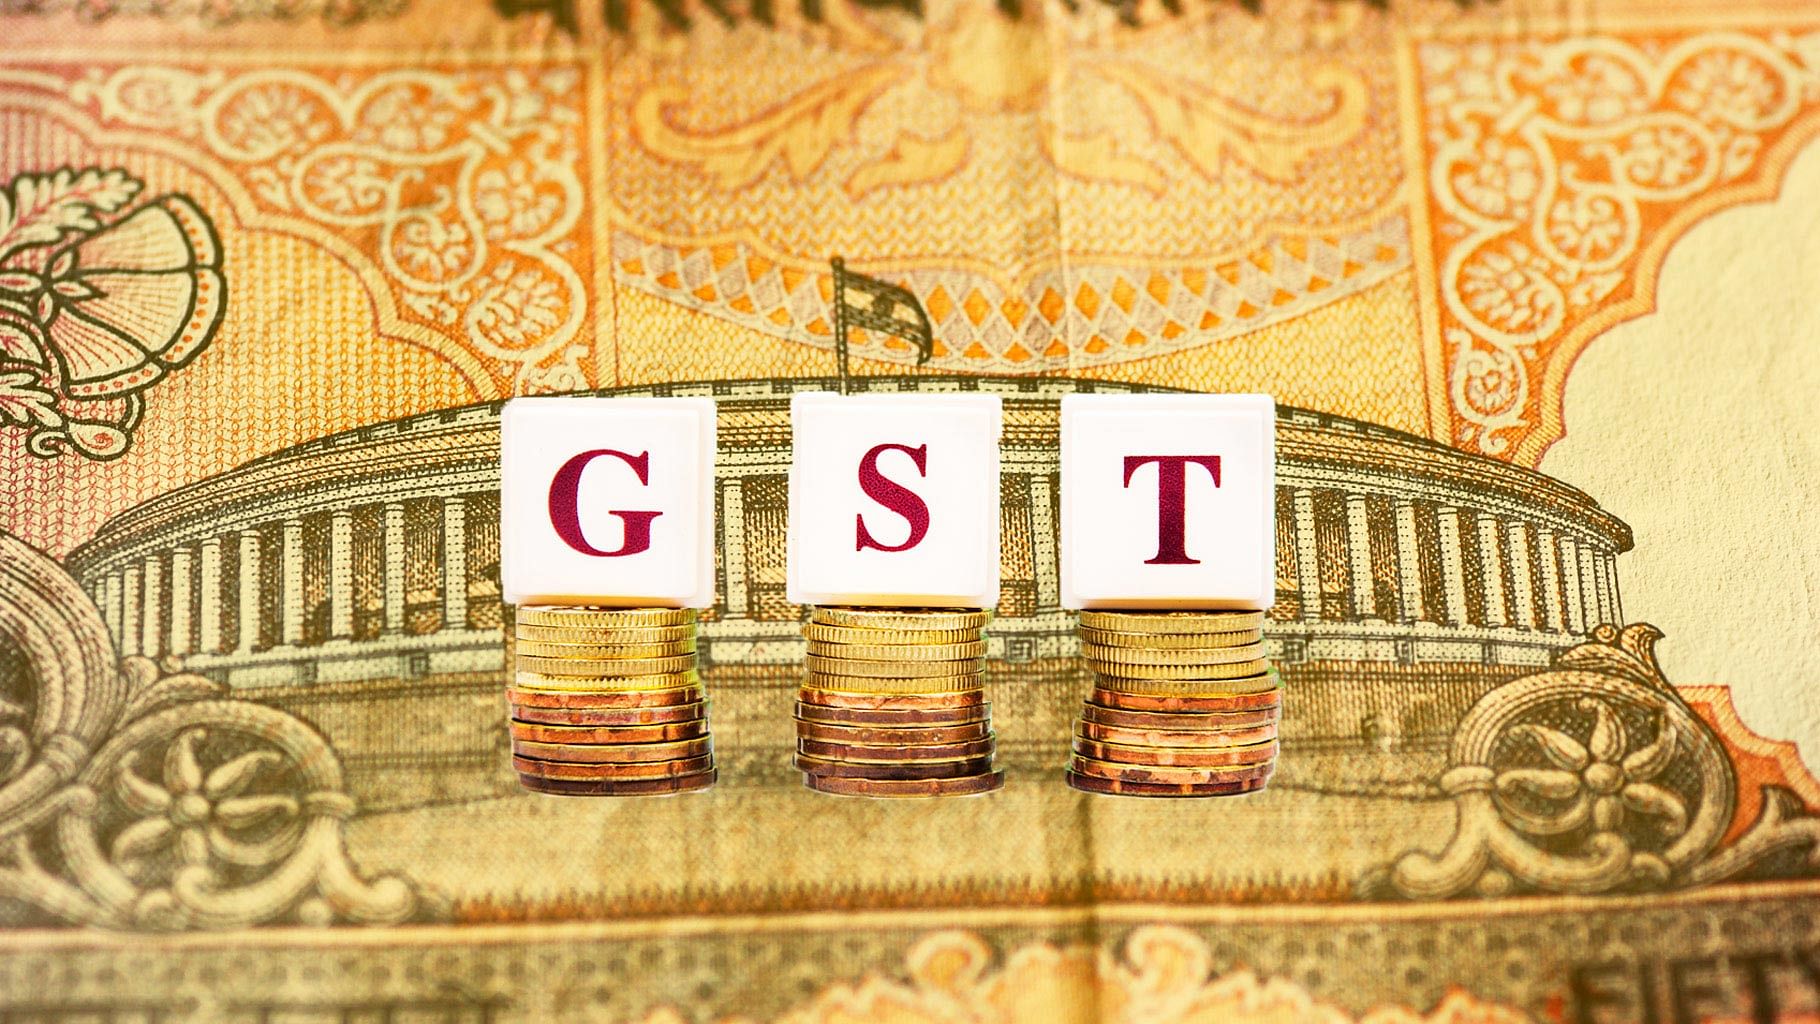  The states will have to get the state GST Bills passed by their respective assemblies.(Photo: Abhilash Mallick/<b>The Quint</b>) &nbsp;